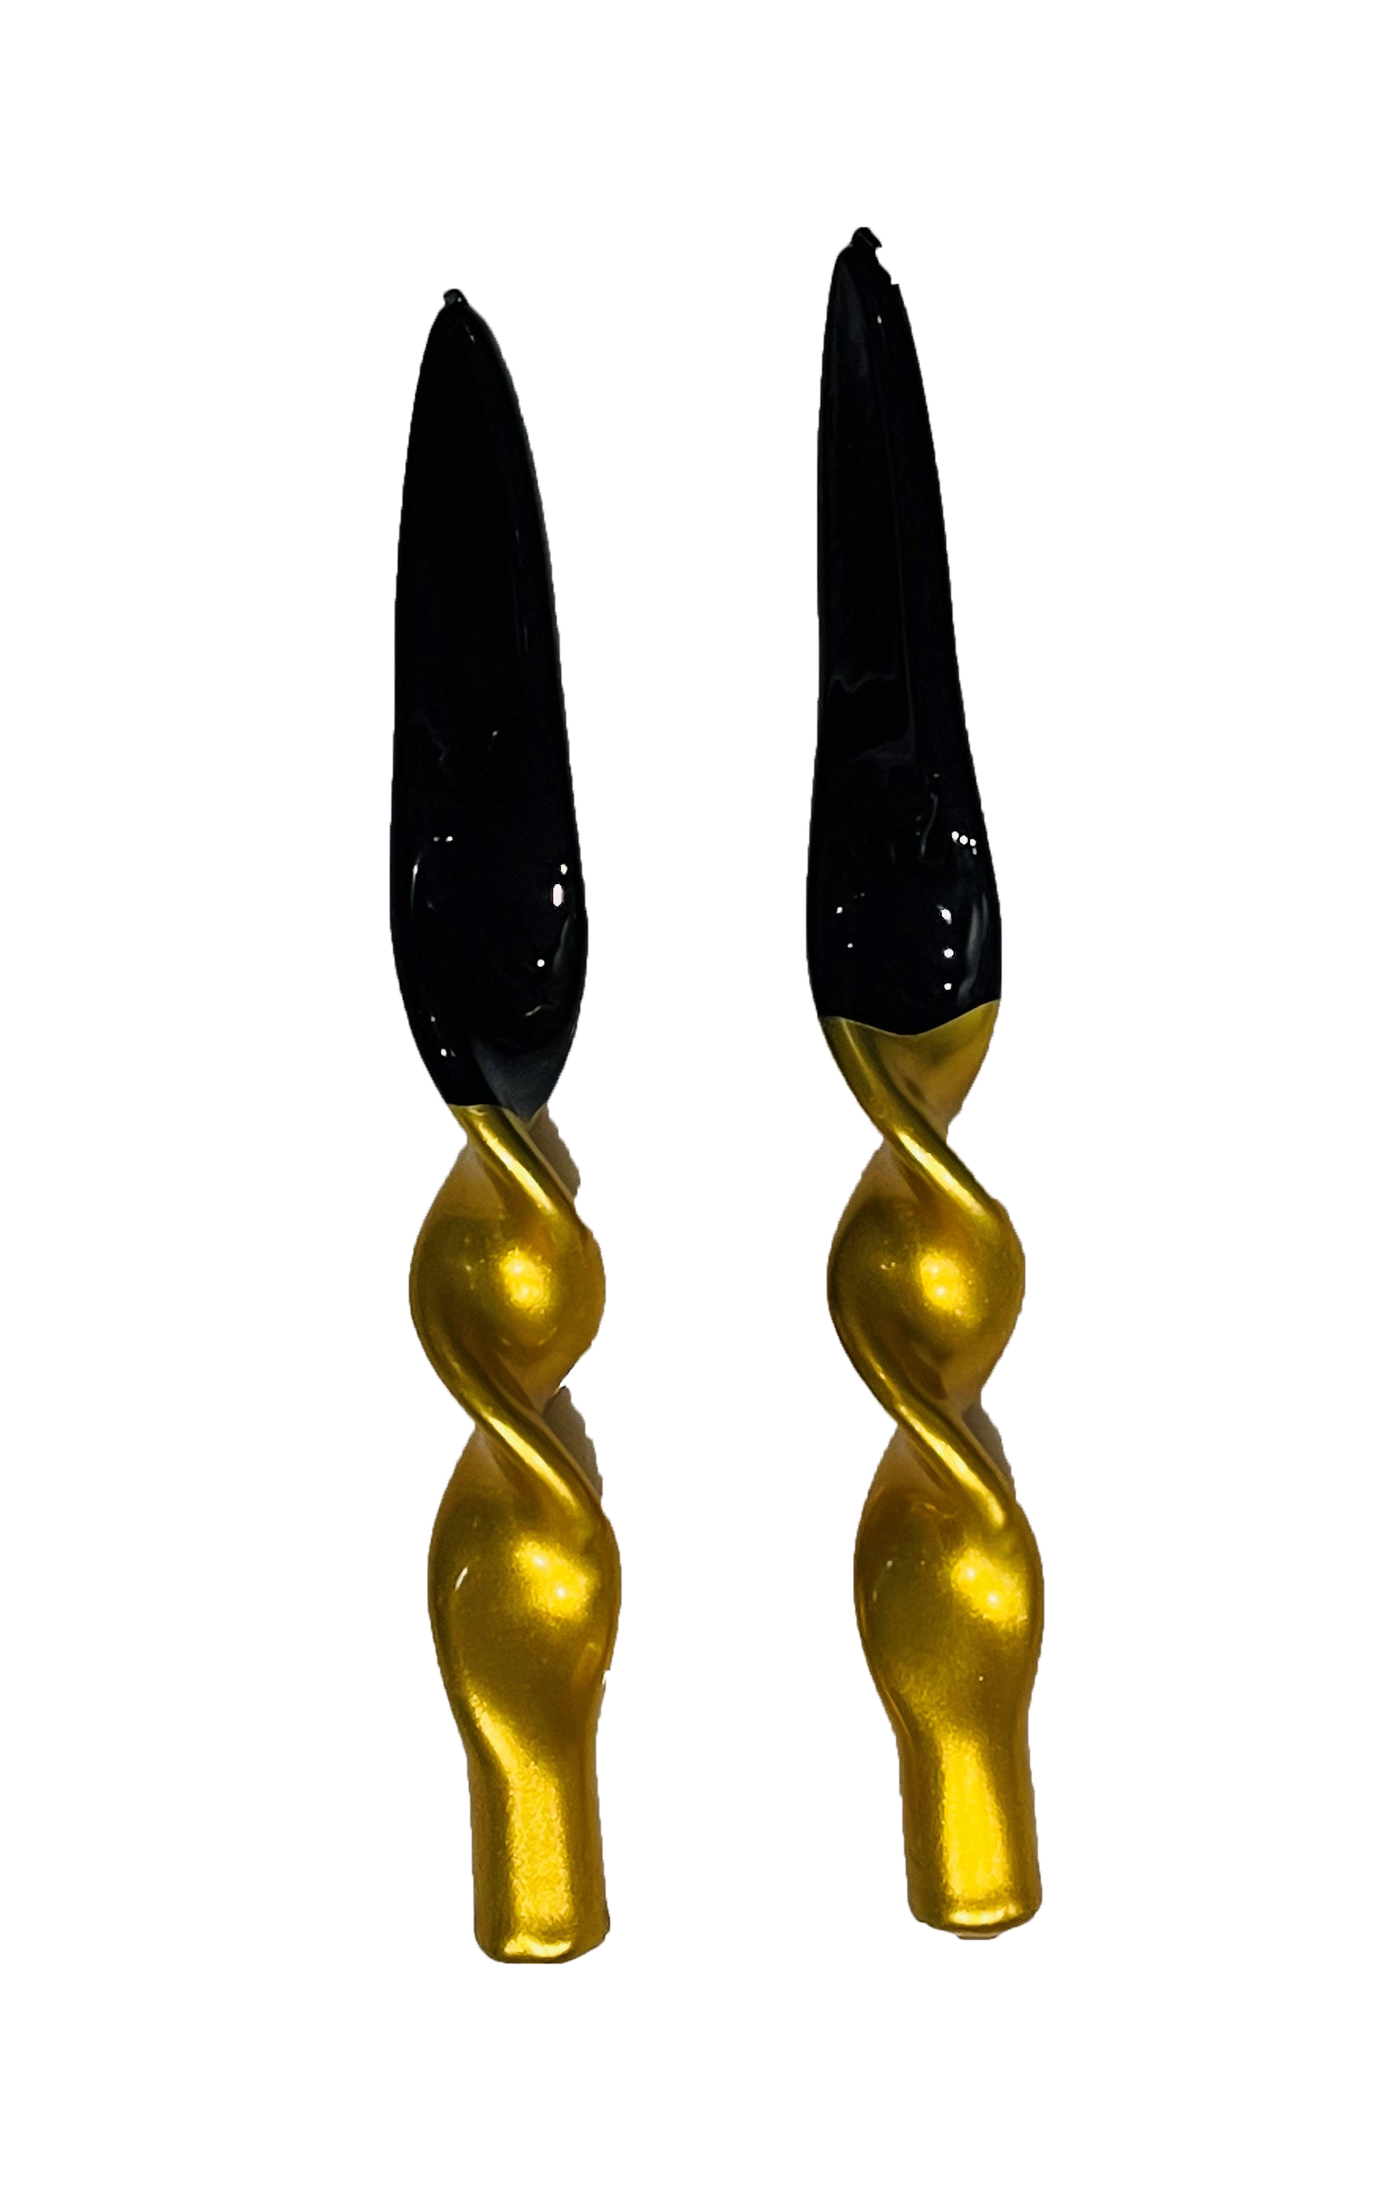 Twisted Lacquered Italian Candles - Set of 2 - Gold/Black